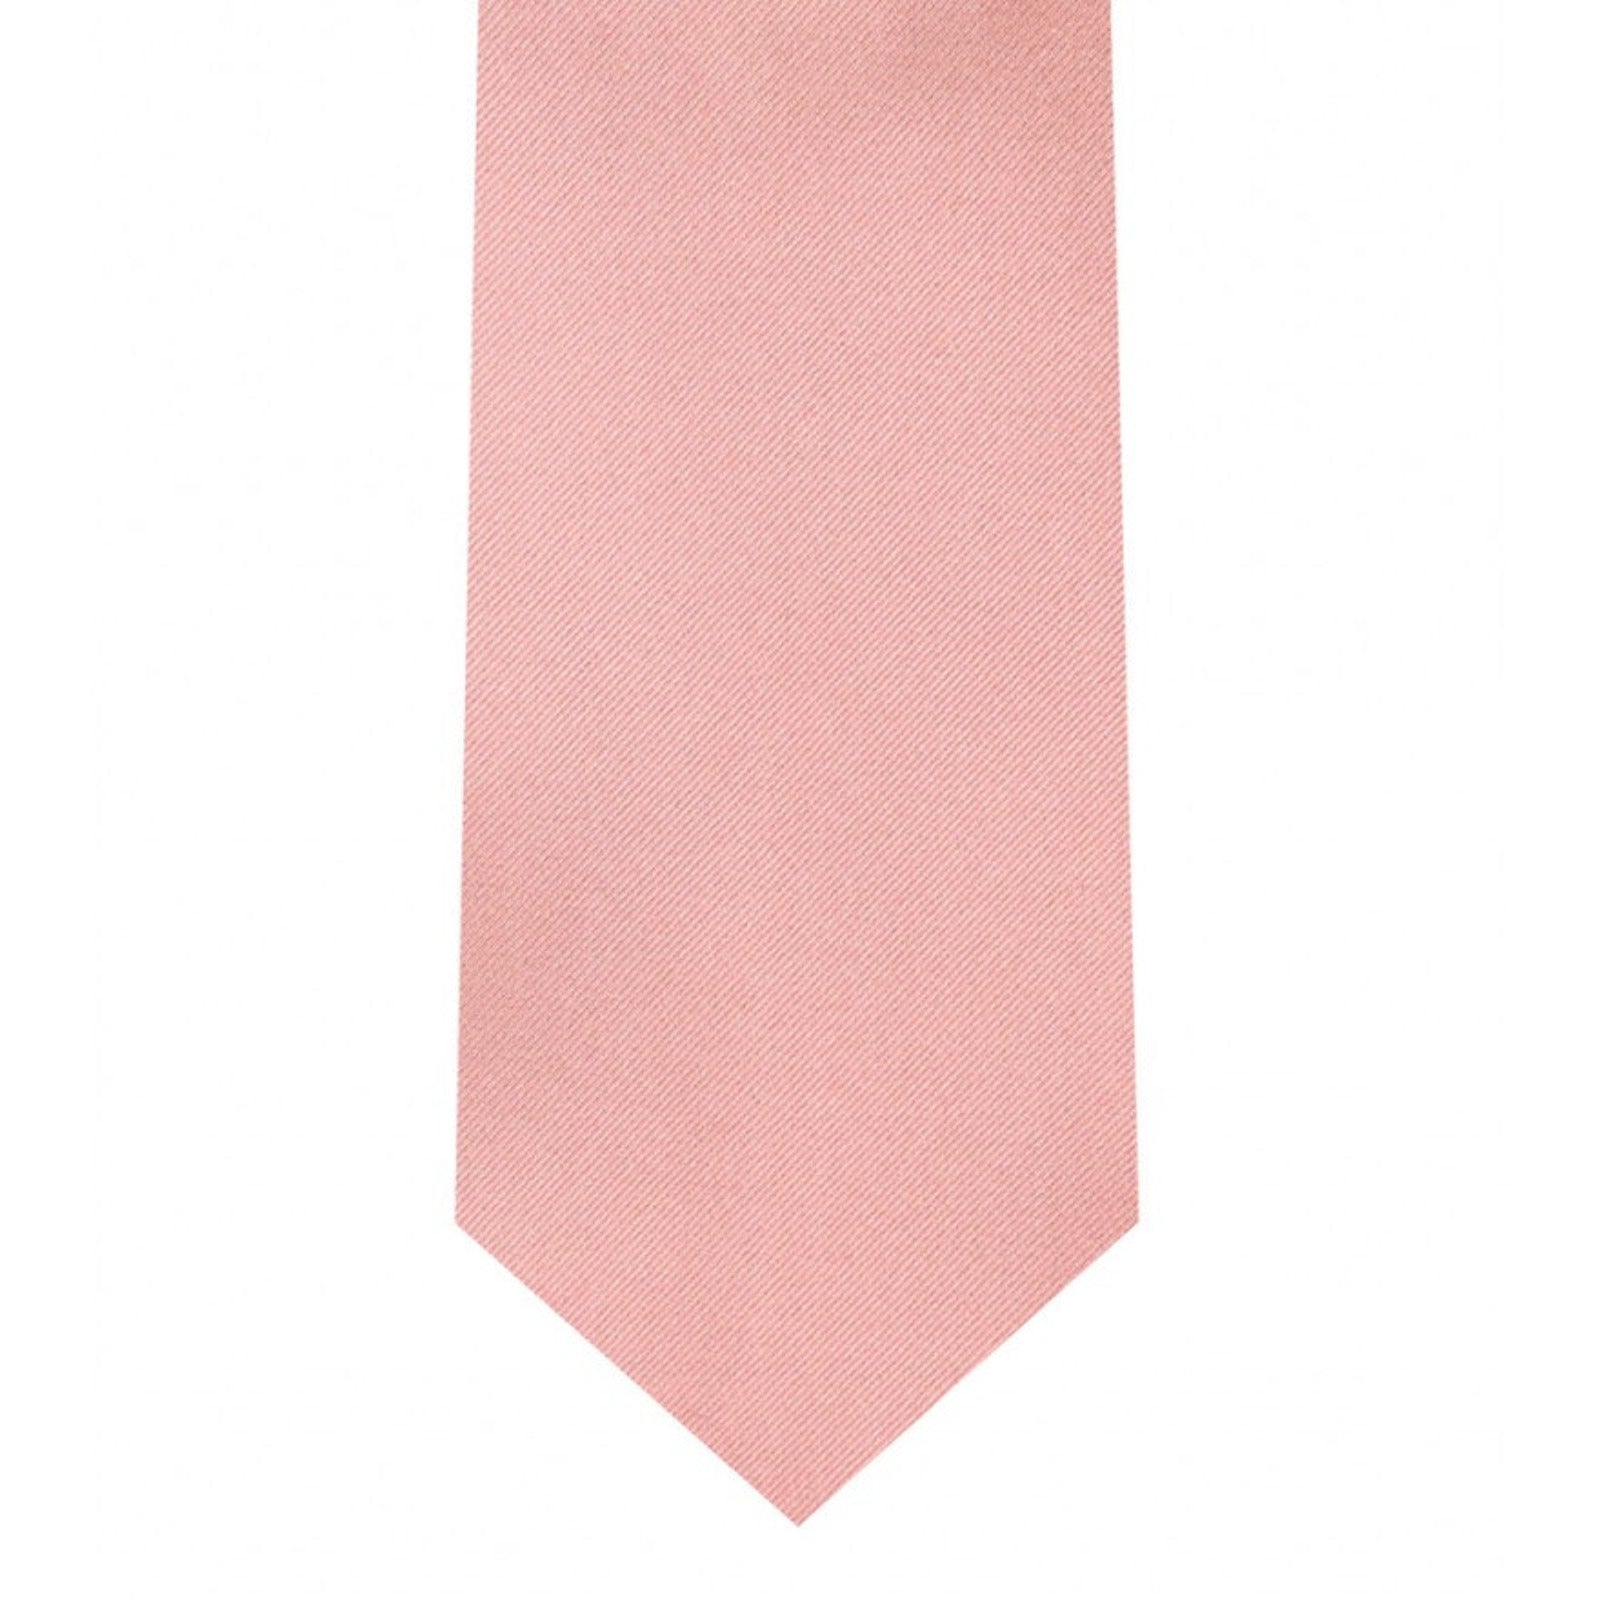 Classic Dusty Rose Tie Skinny width 2.75 inches With Matching Pocket Square | KCT Menswear